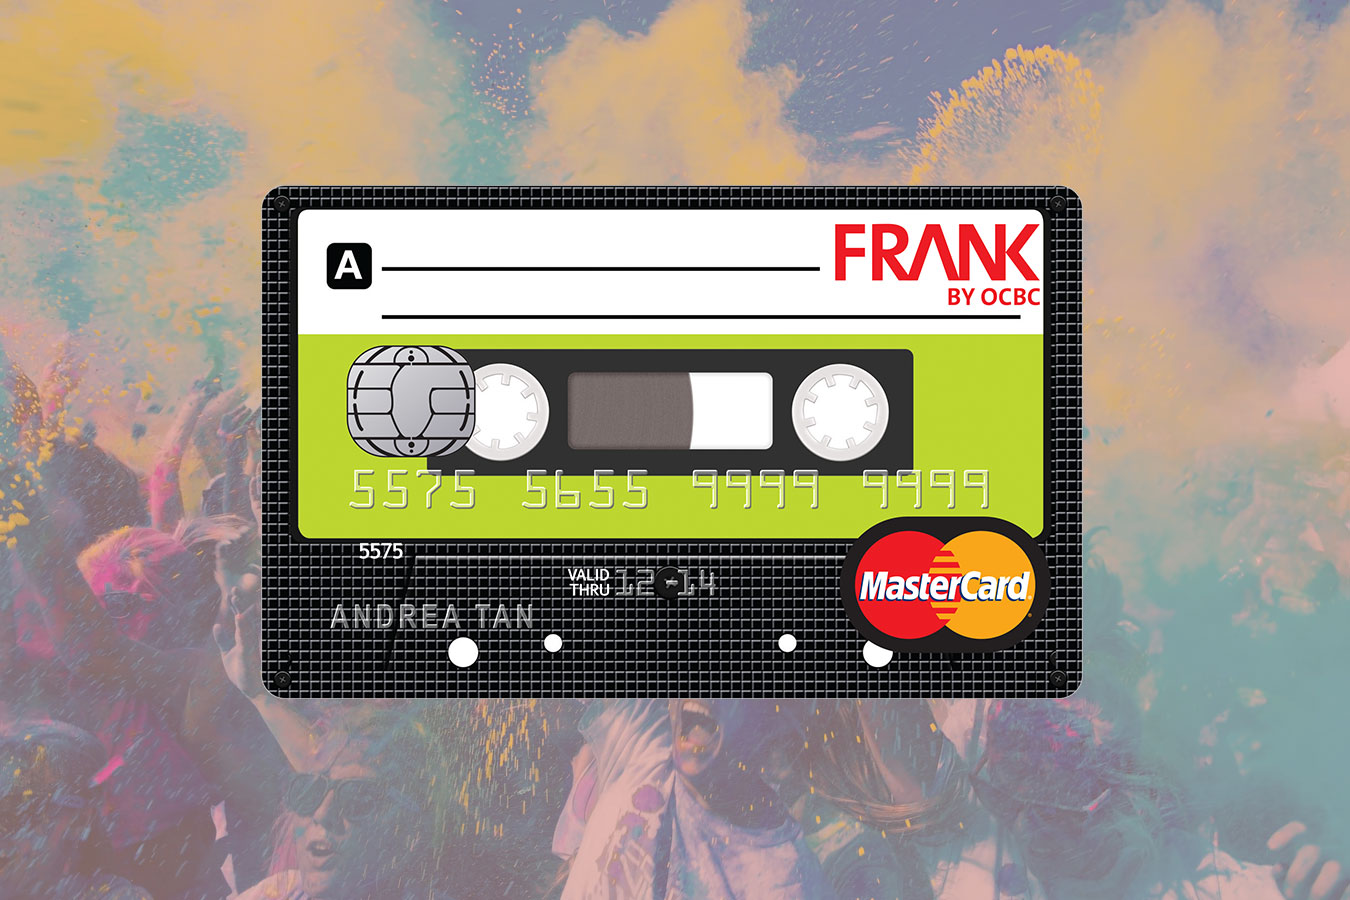 A card design featuring a graphic cassette tape for FRANK by OCBC